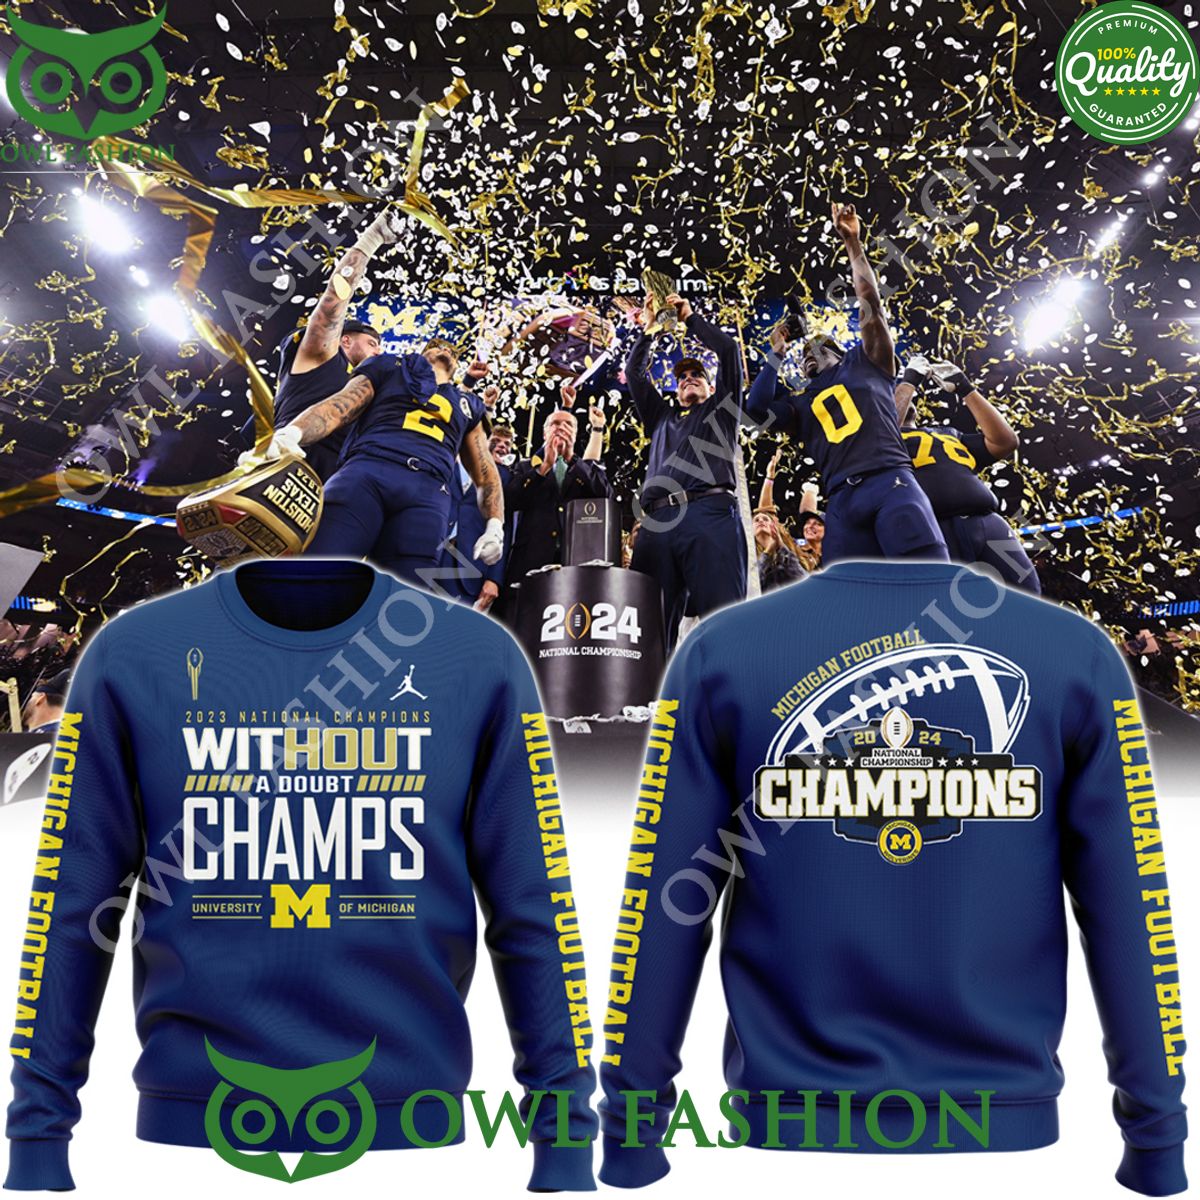 Michigan Wolverines football NATIONAL CHAMPIONSHIP 2024 without a doubt Sweatshirt